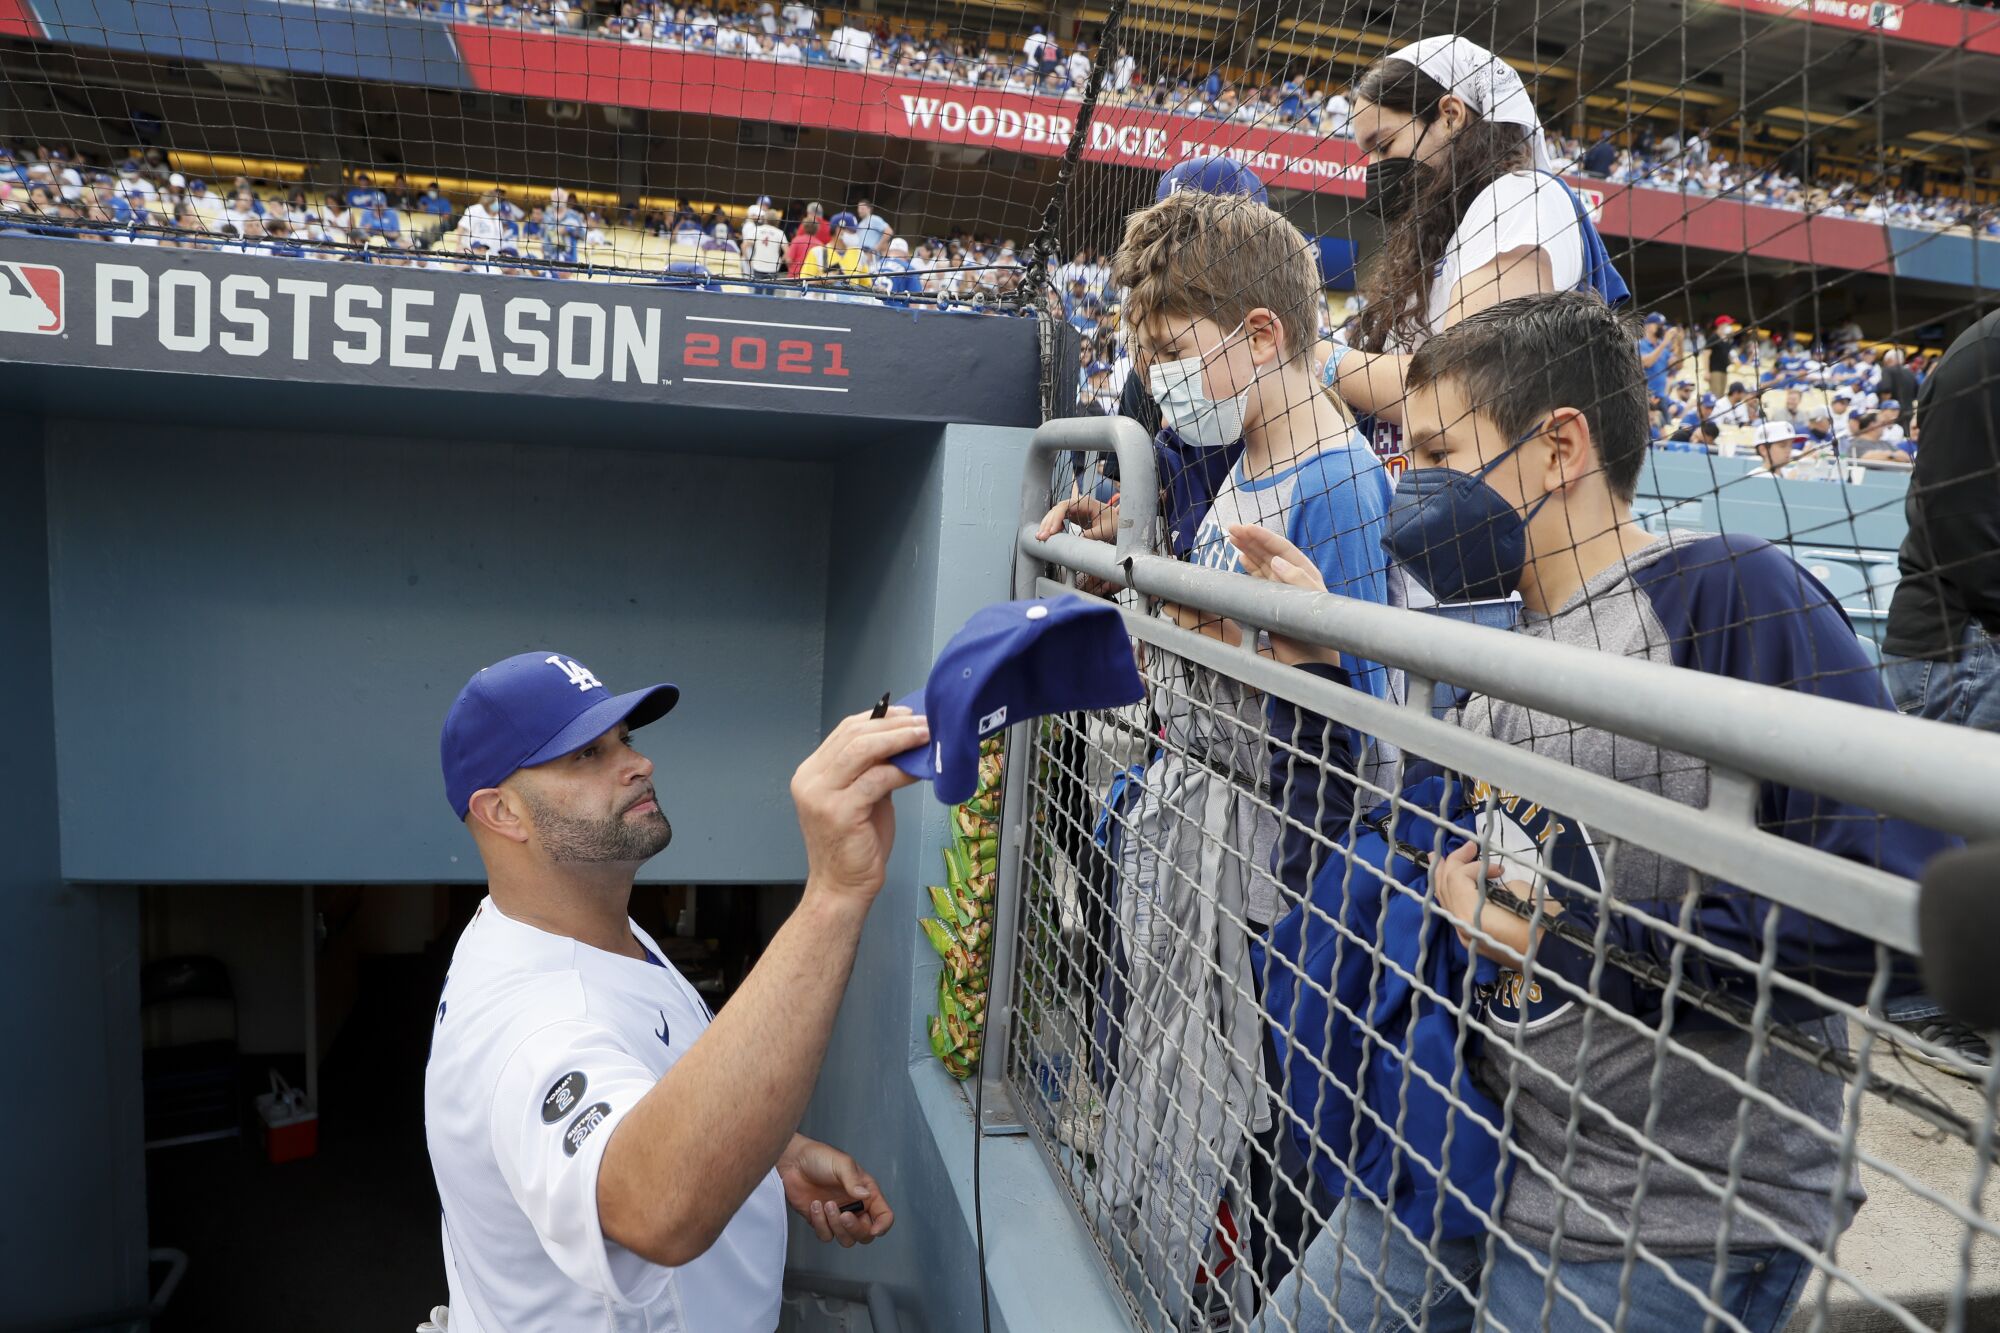 Los Angeles Dodgers' Albert Pujols signs autographs for fans before the game against the St. Louis Cardinals